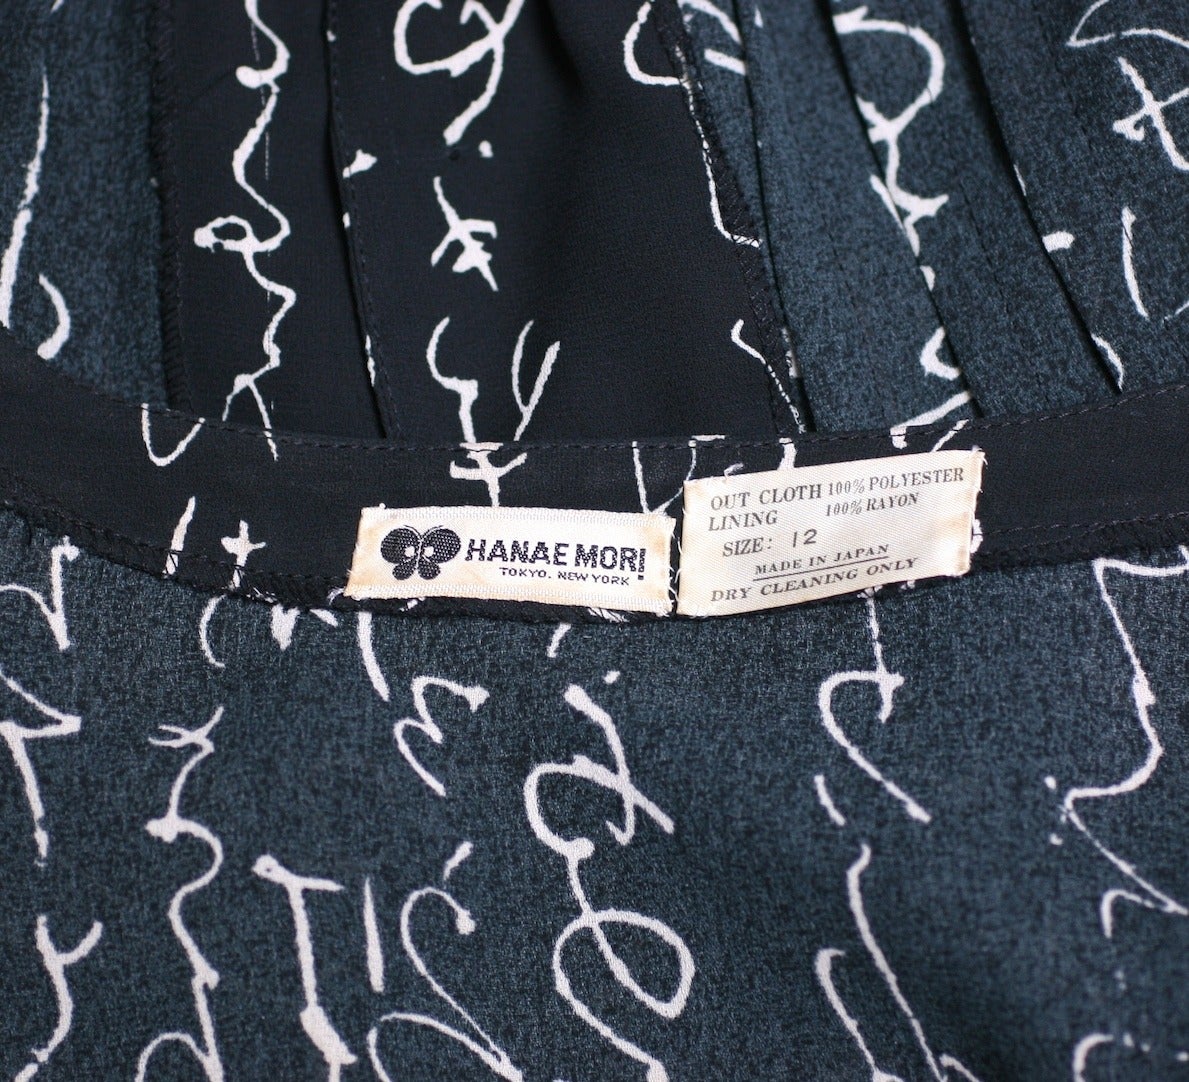 Hanae Mori Calligraphic Print Gown In Excellent Condition For Sale In New York, NY